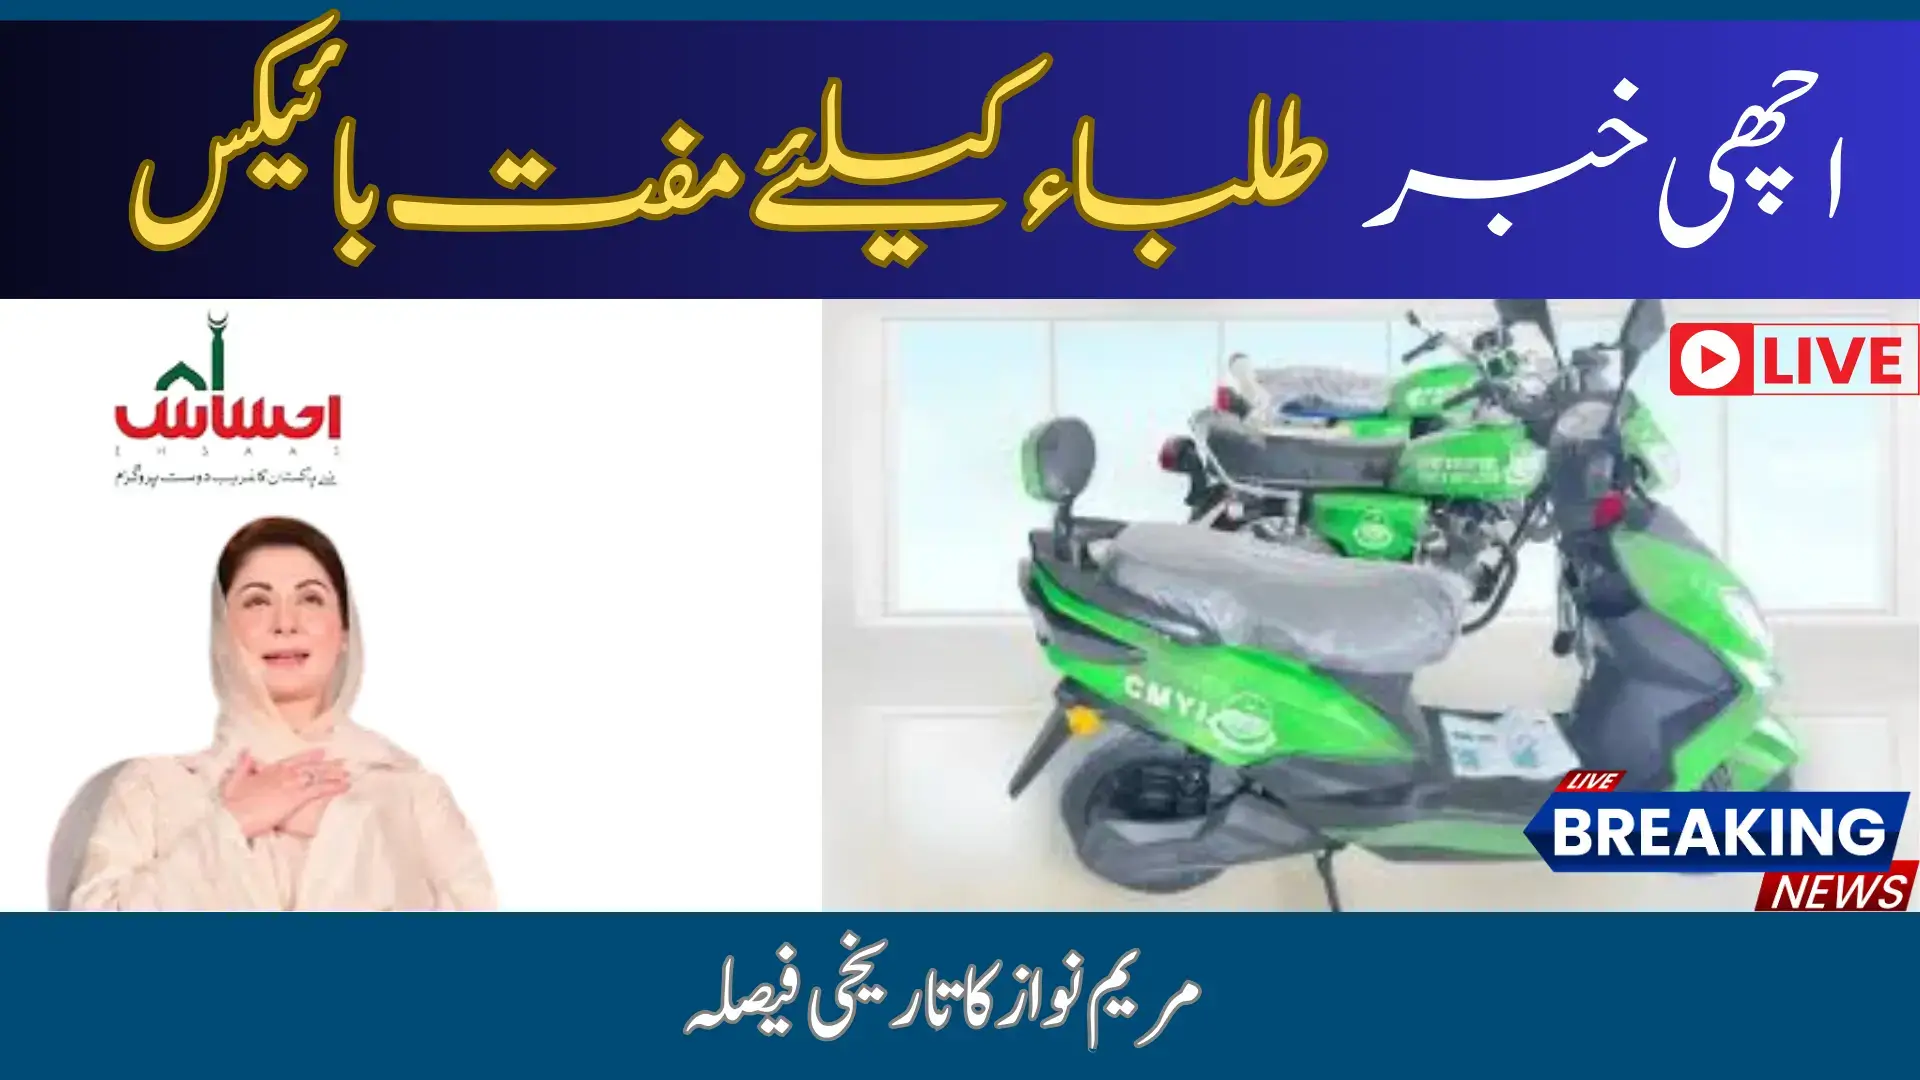 Get Your Free Electric Bike Now with CM Punjab's Scheme